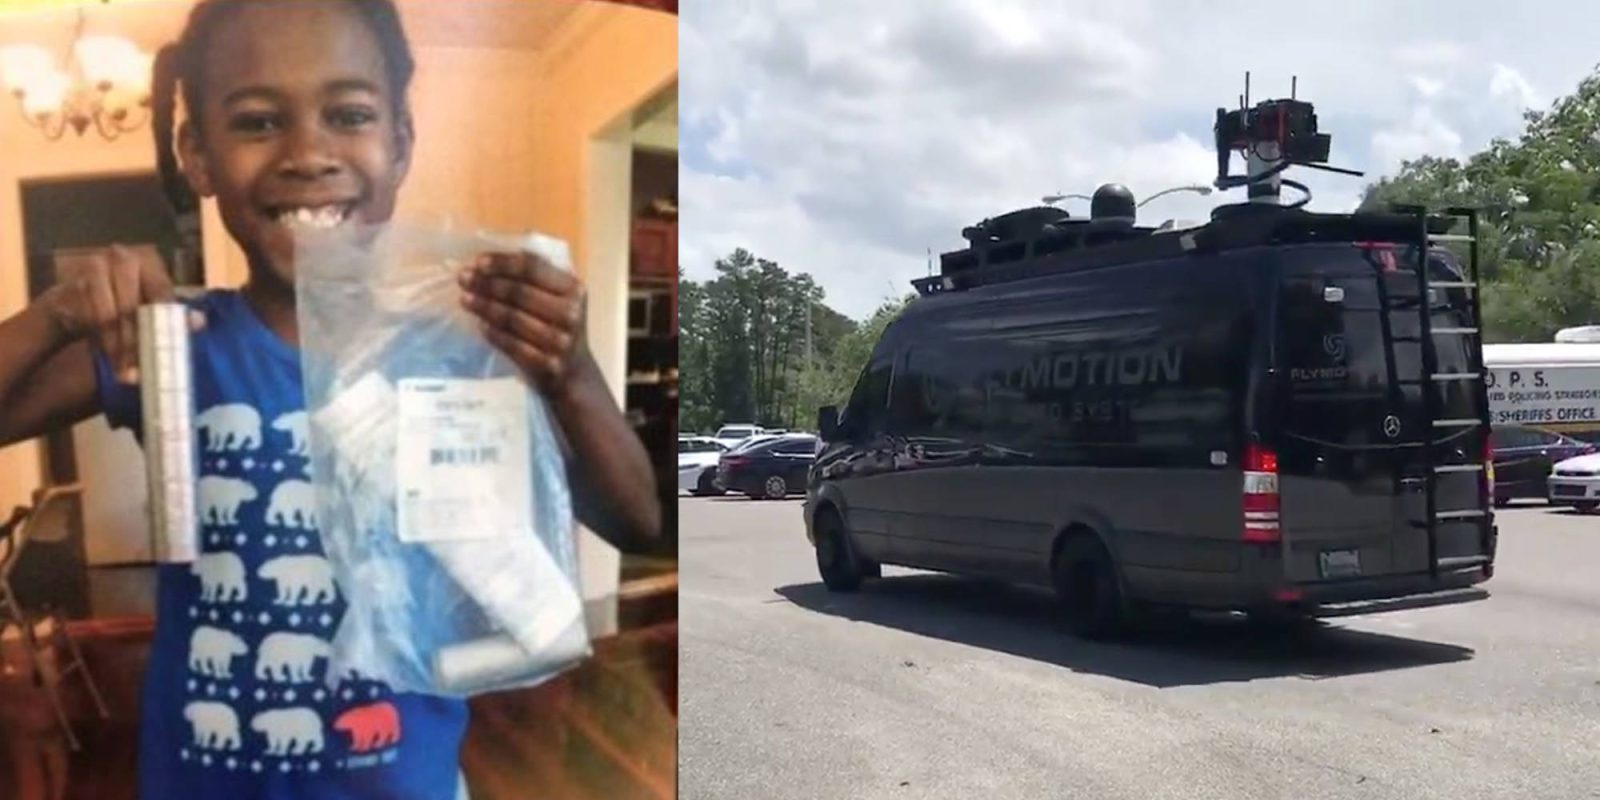 Drone company, FlyMotion helped in the search of a missing 9-year-old girl from Jacksonville